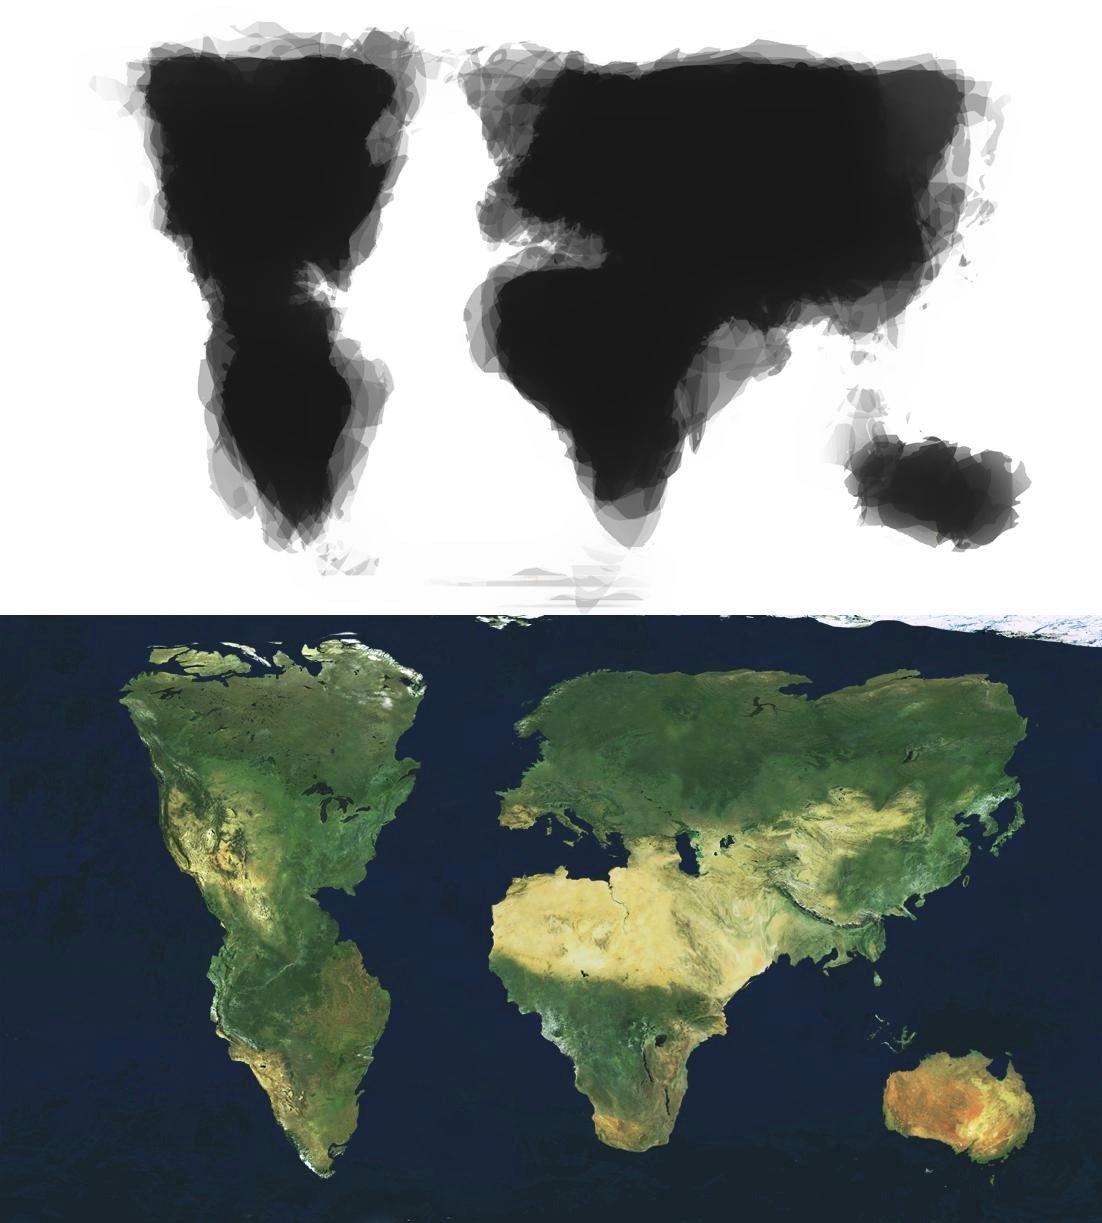 The true size of things on world maps